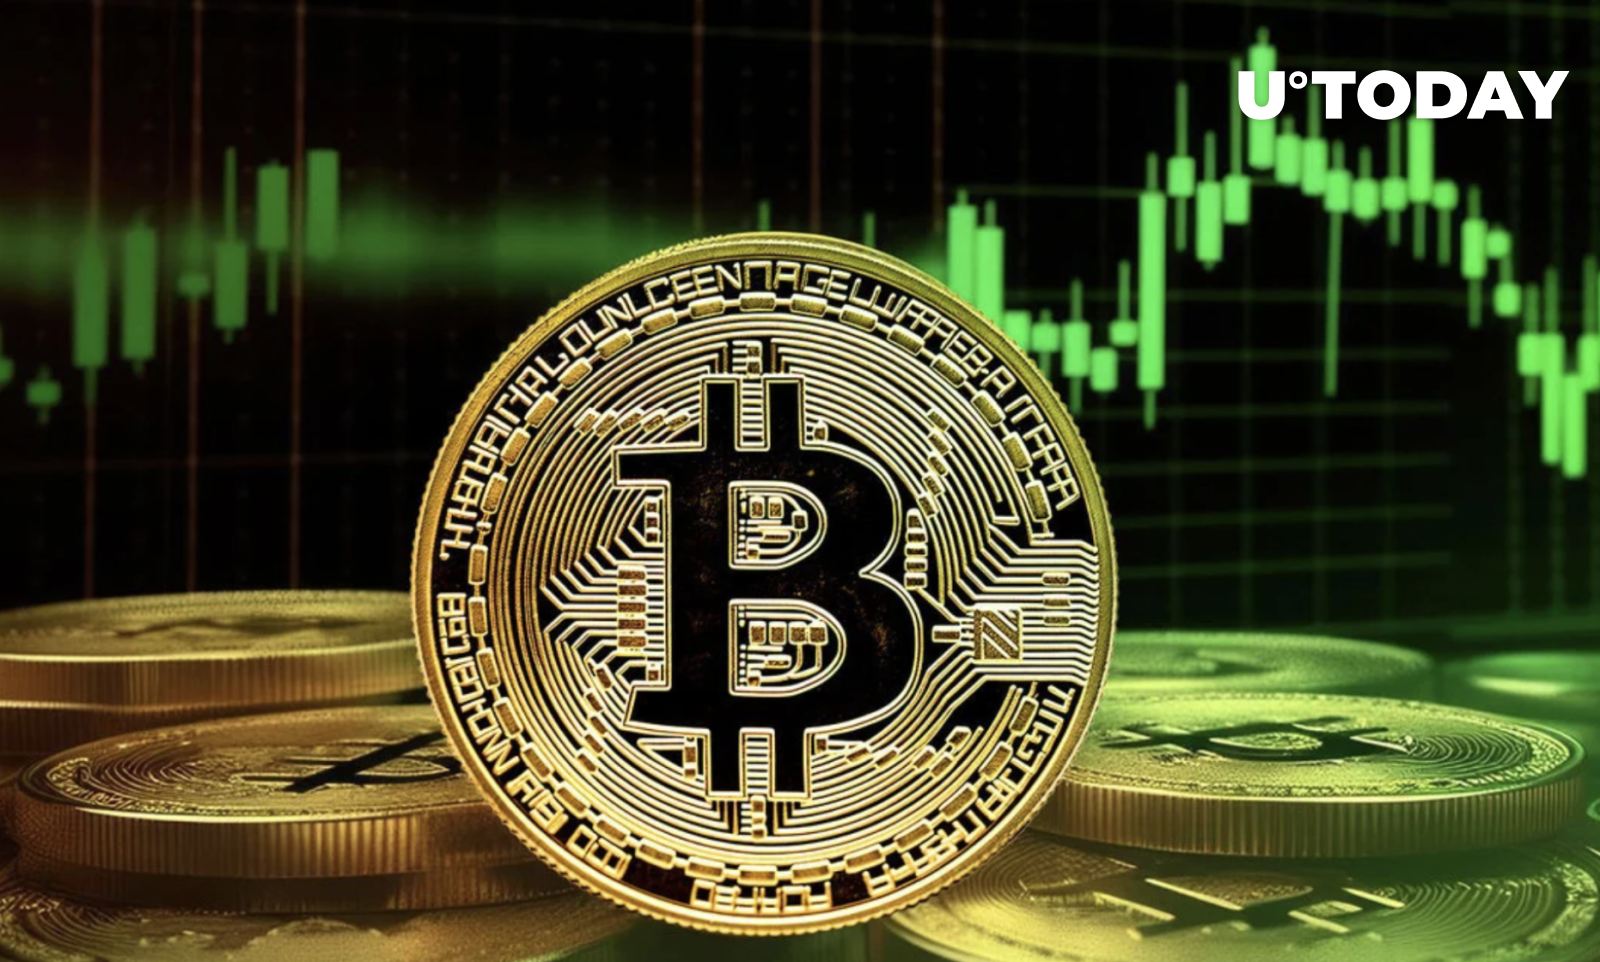 Two Key Trends to Watch Ahead of Bitcoin (BTC) Halving